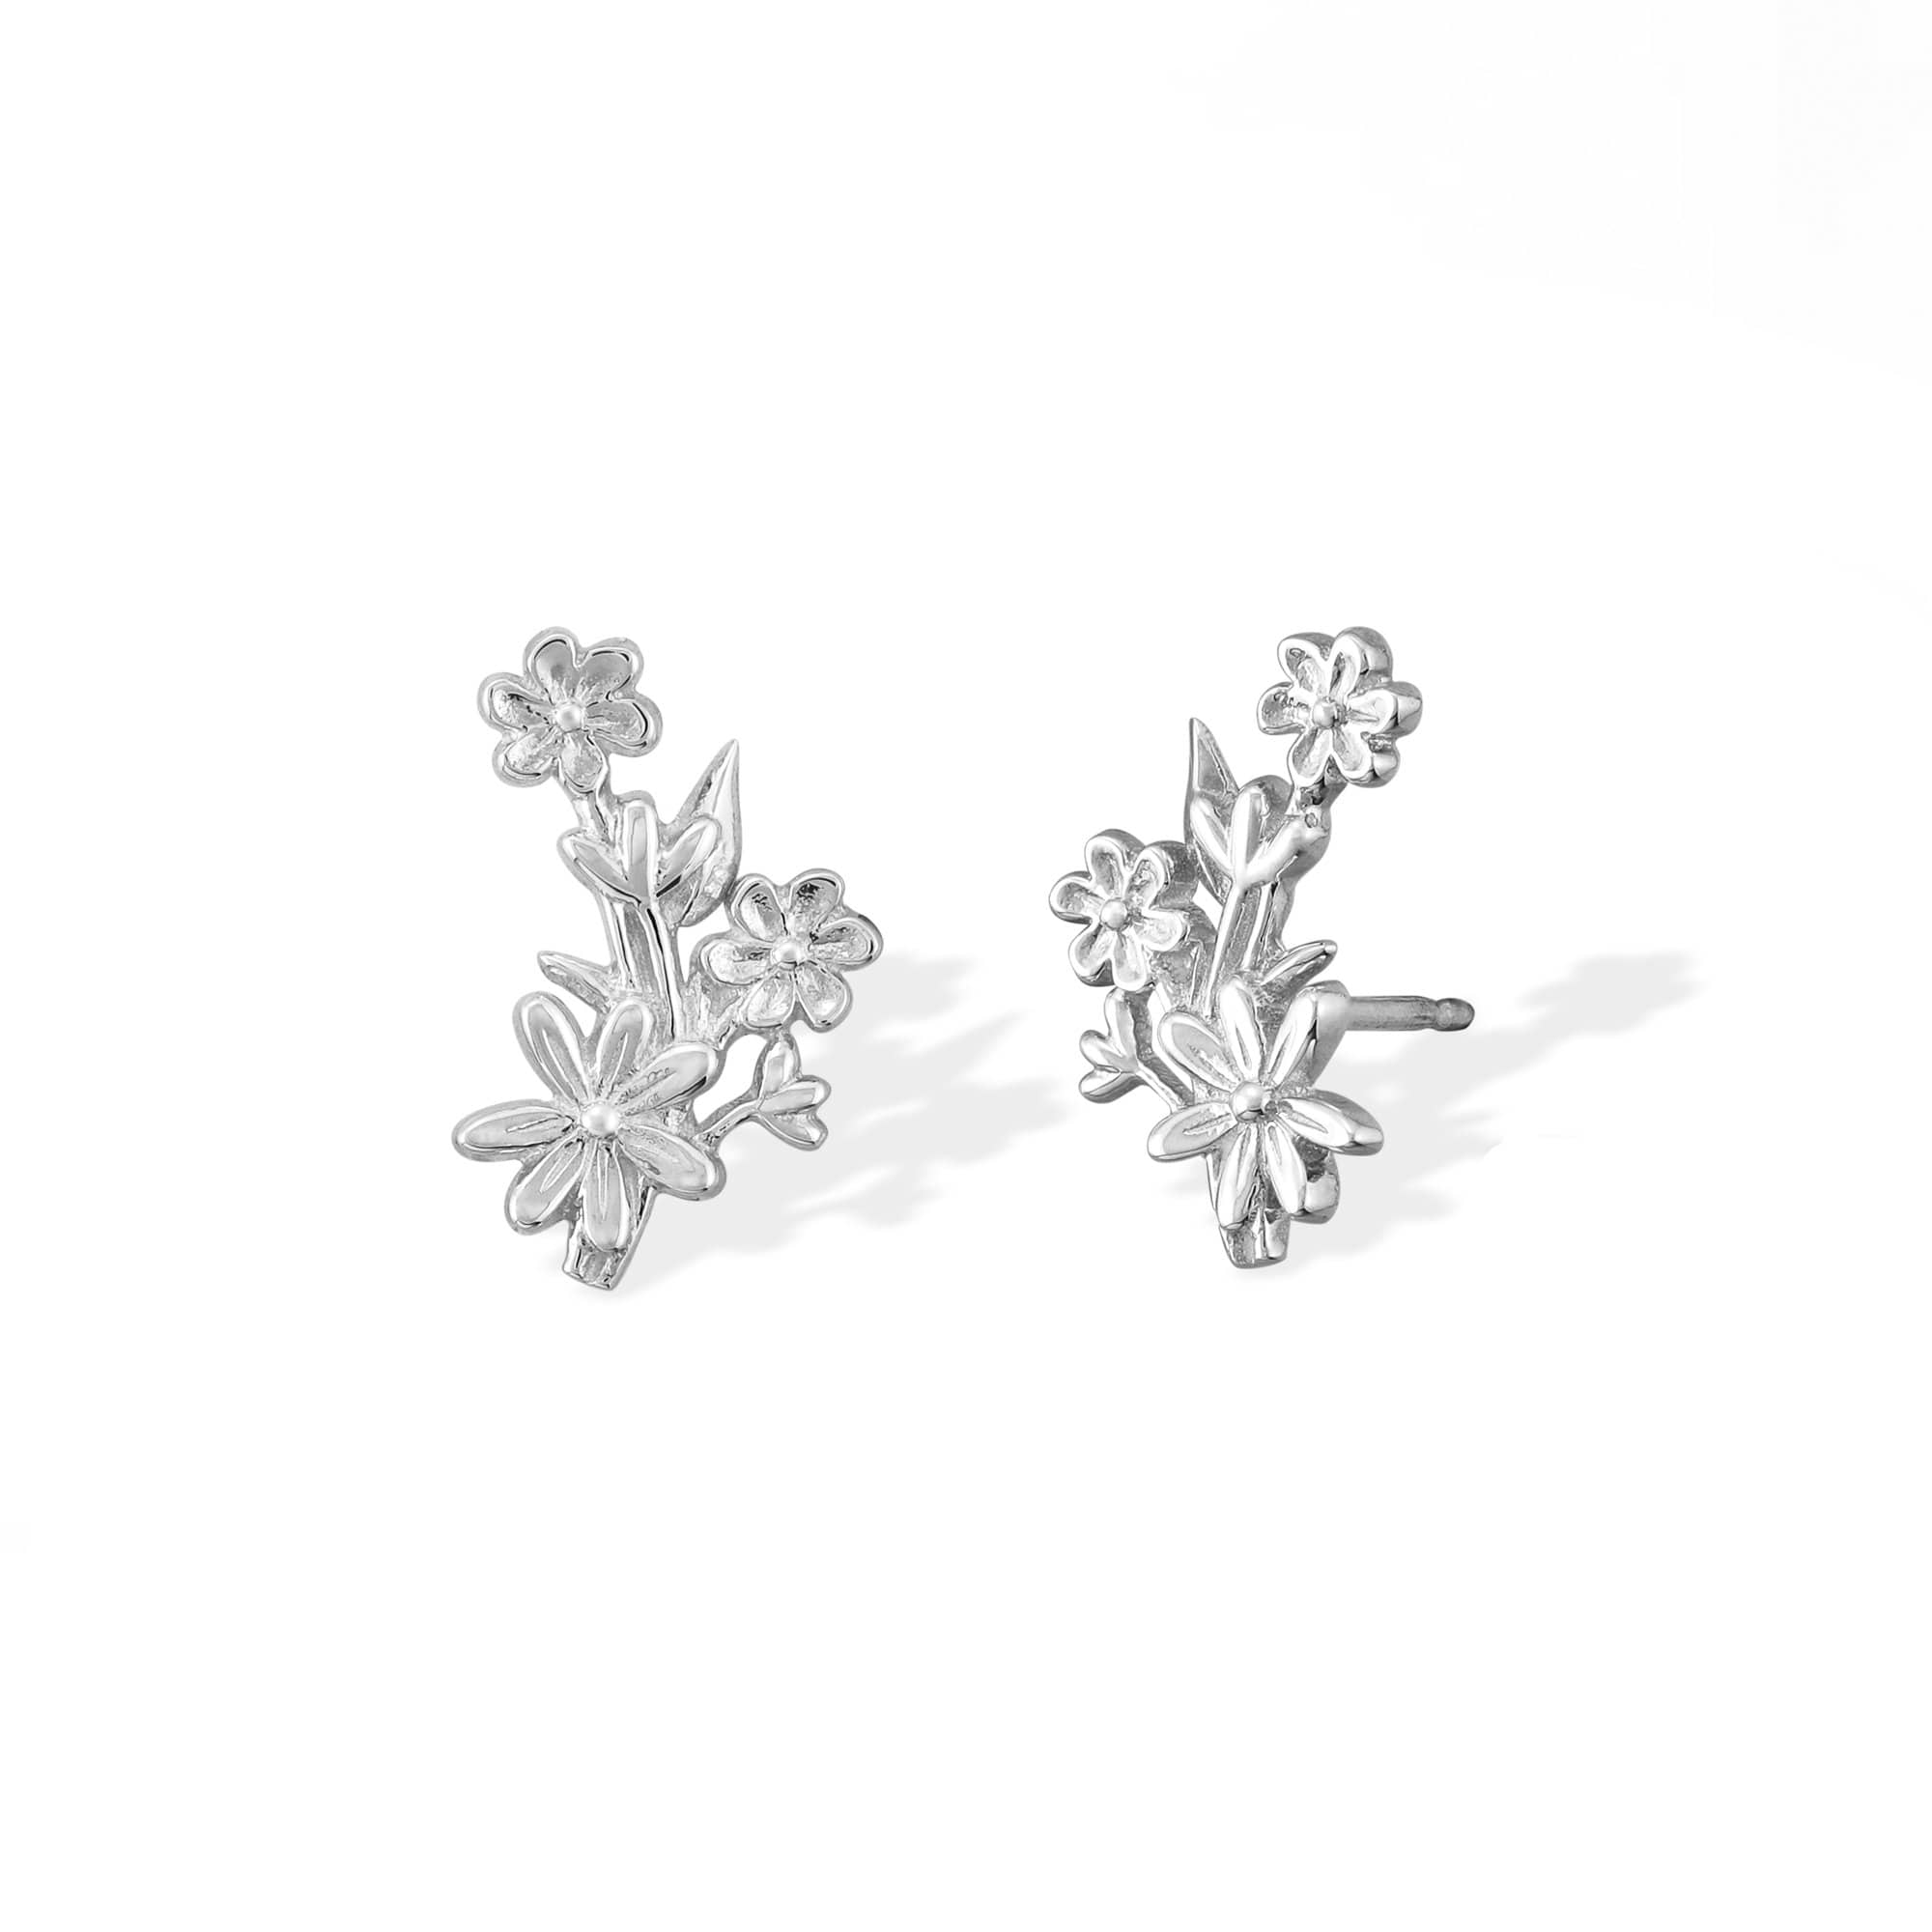 Boma Sterling Silver Flower Bouquet Posts    